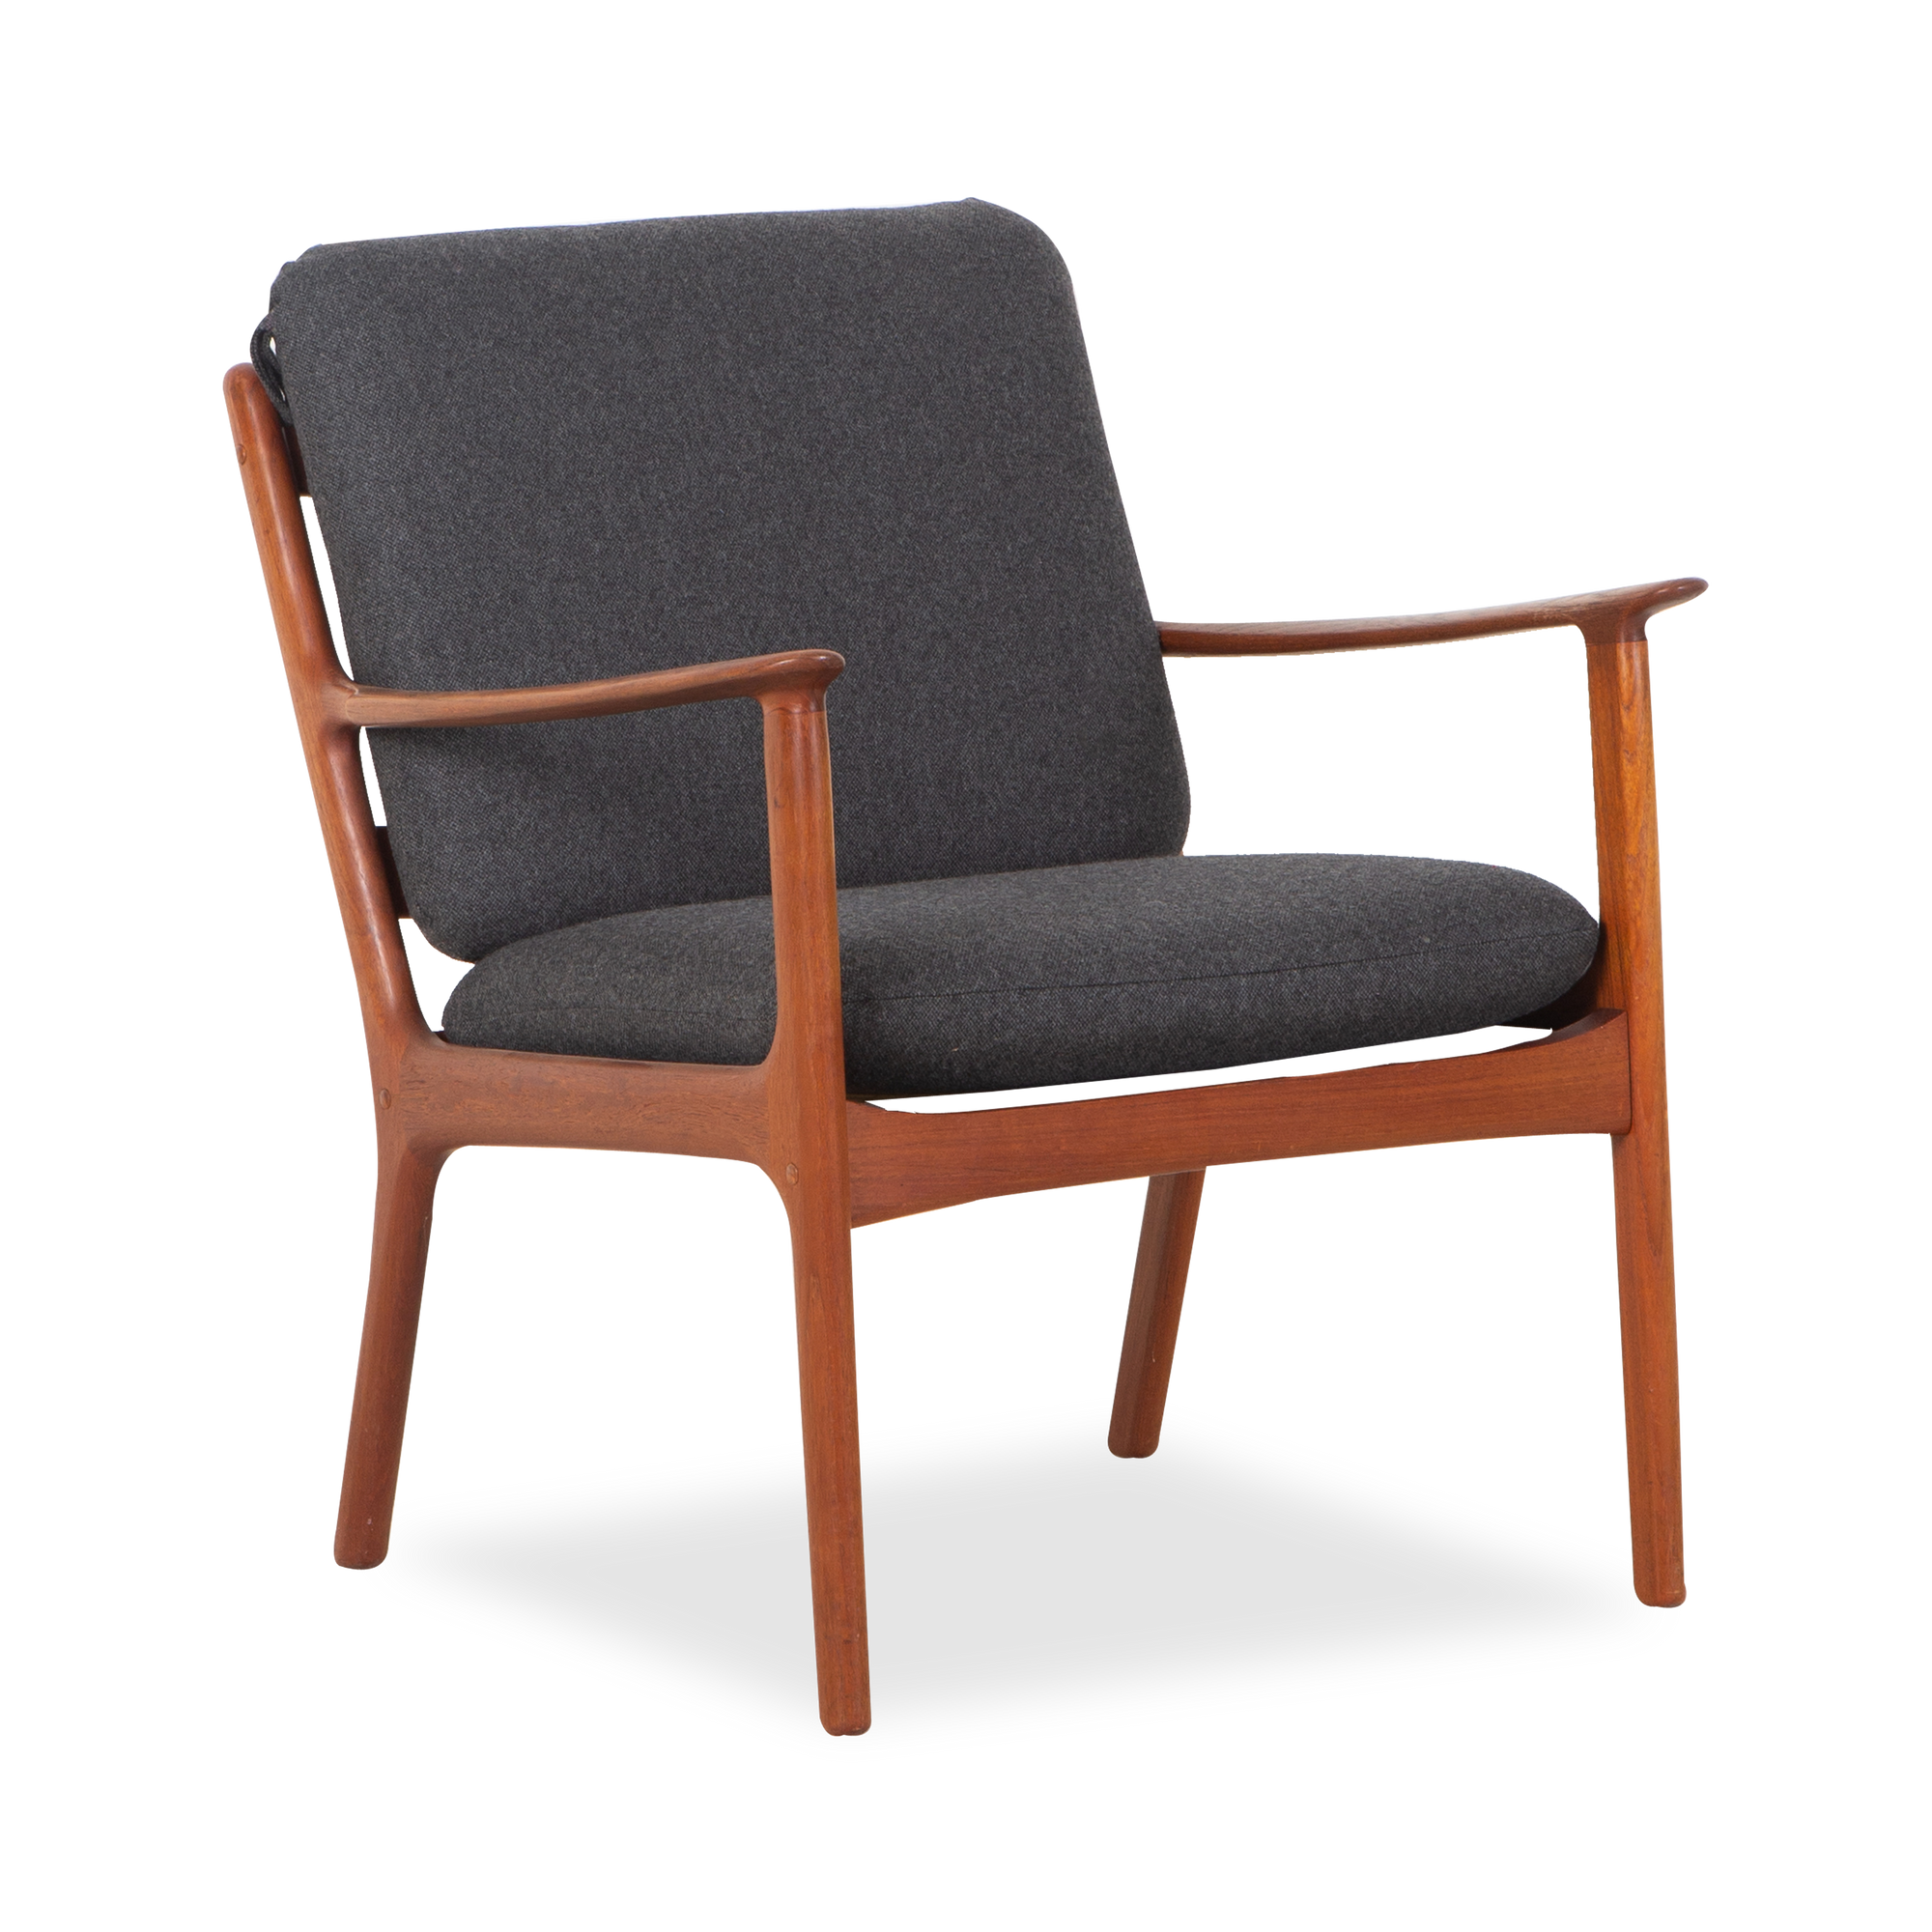 The epitome of a mid-century modern lounge chair, this vintage PJ112 Chair and matching stool were designed by Ole Wanscher and manufactured by Poul Jeppensens, circa 1960s.